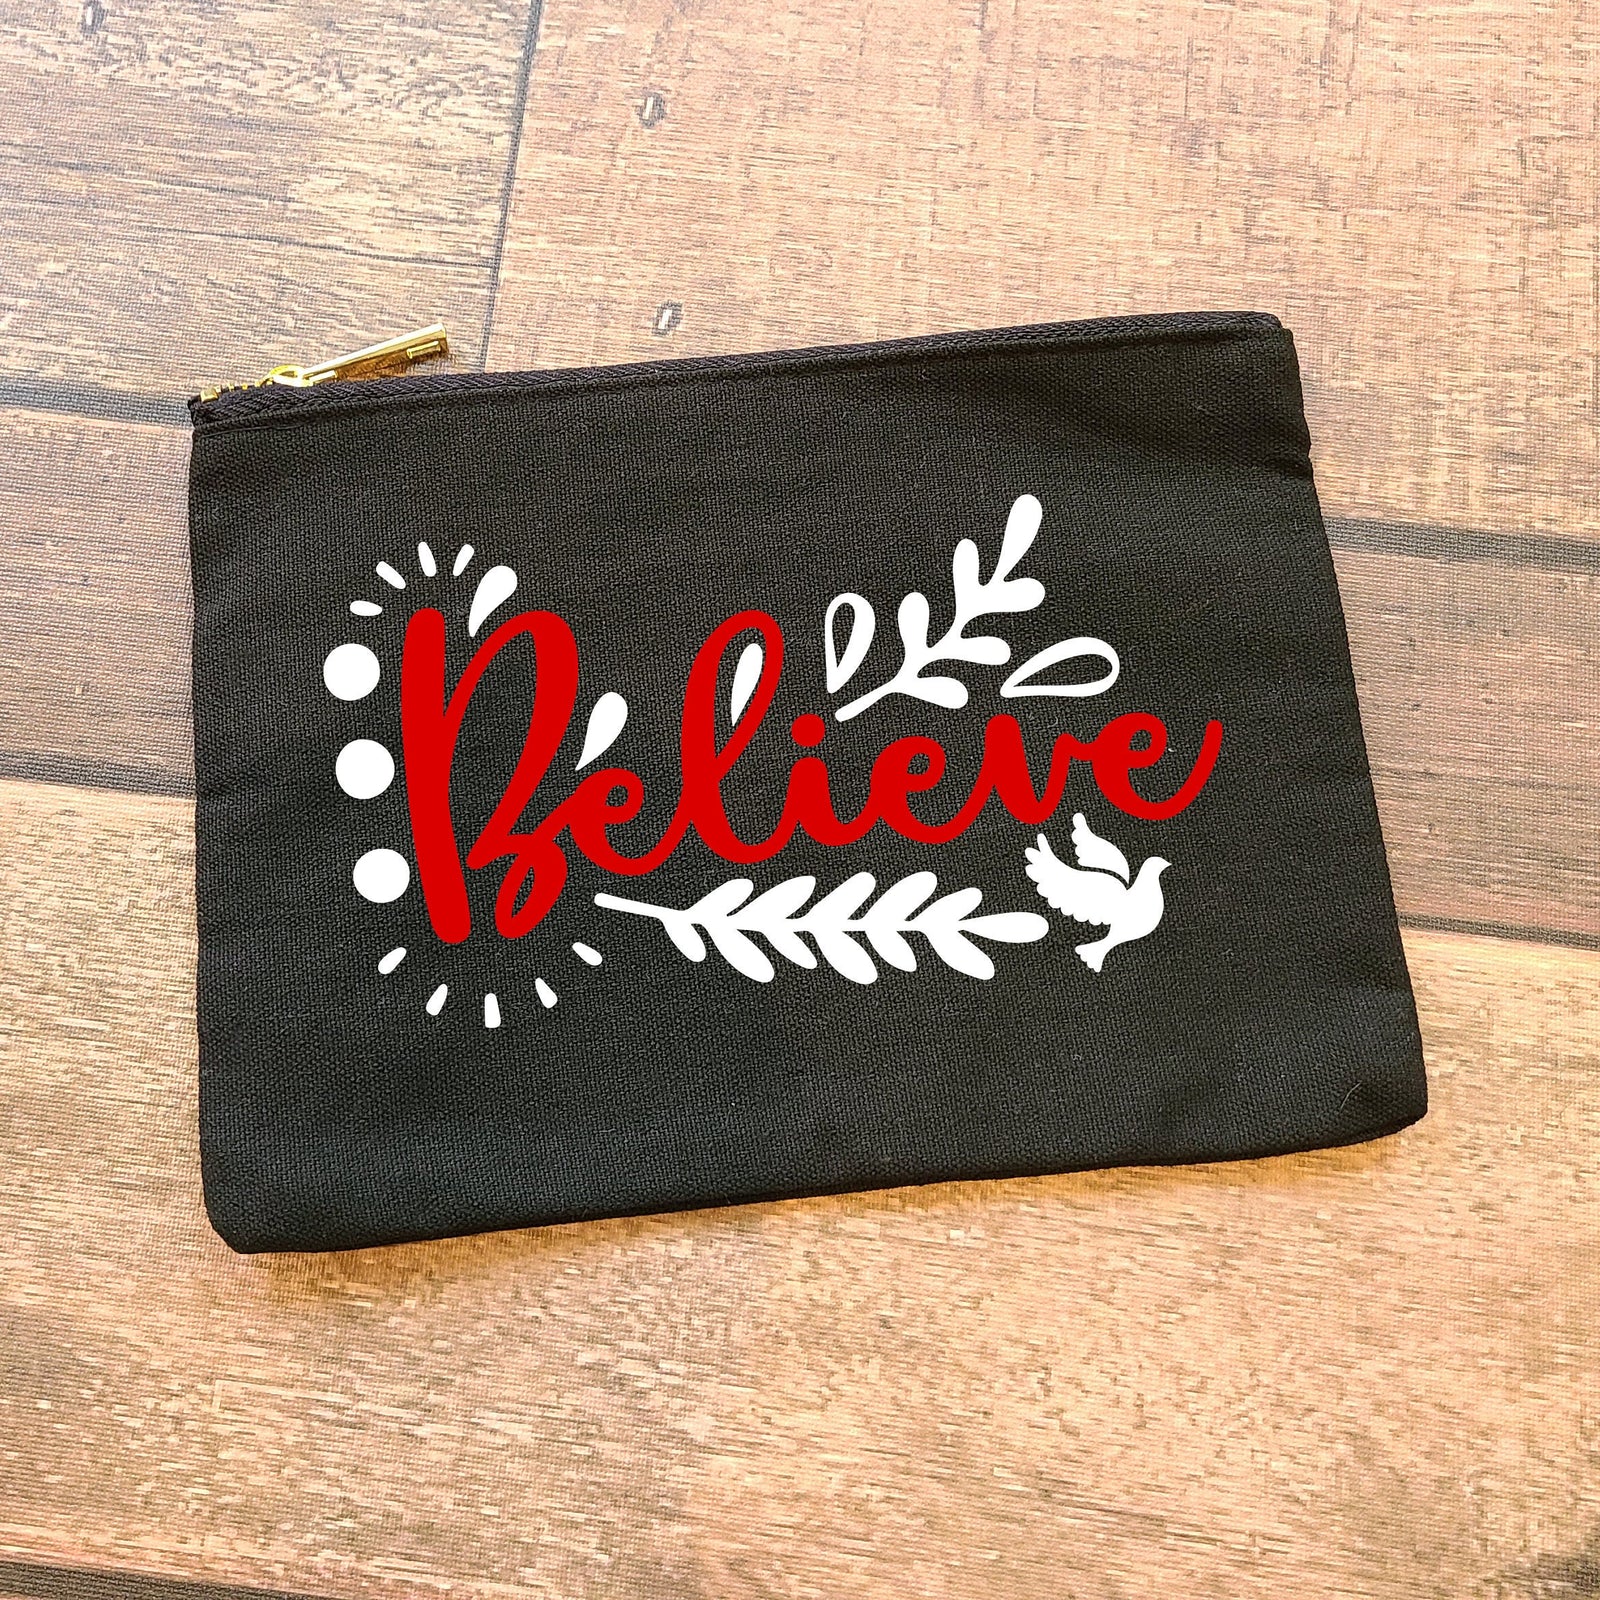 Believe Canvas Bag - Stocking Stuffer - Cosmetic Bag - Small Zipper Pouch - Cute Cheap Christmas Gift